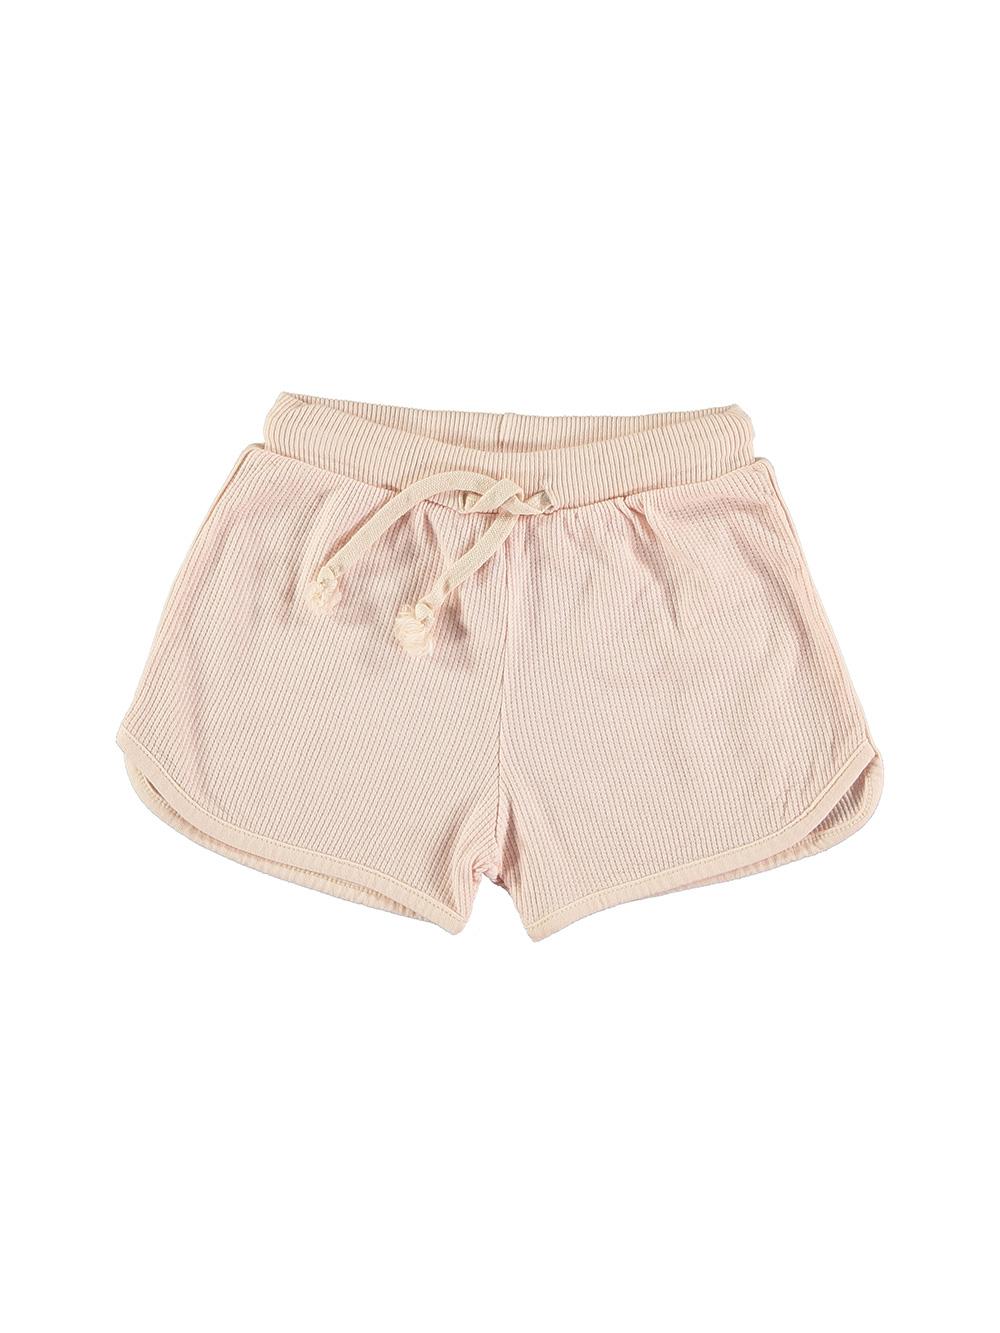 PALE PINK SHORTS WITH DRAWSTRING